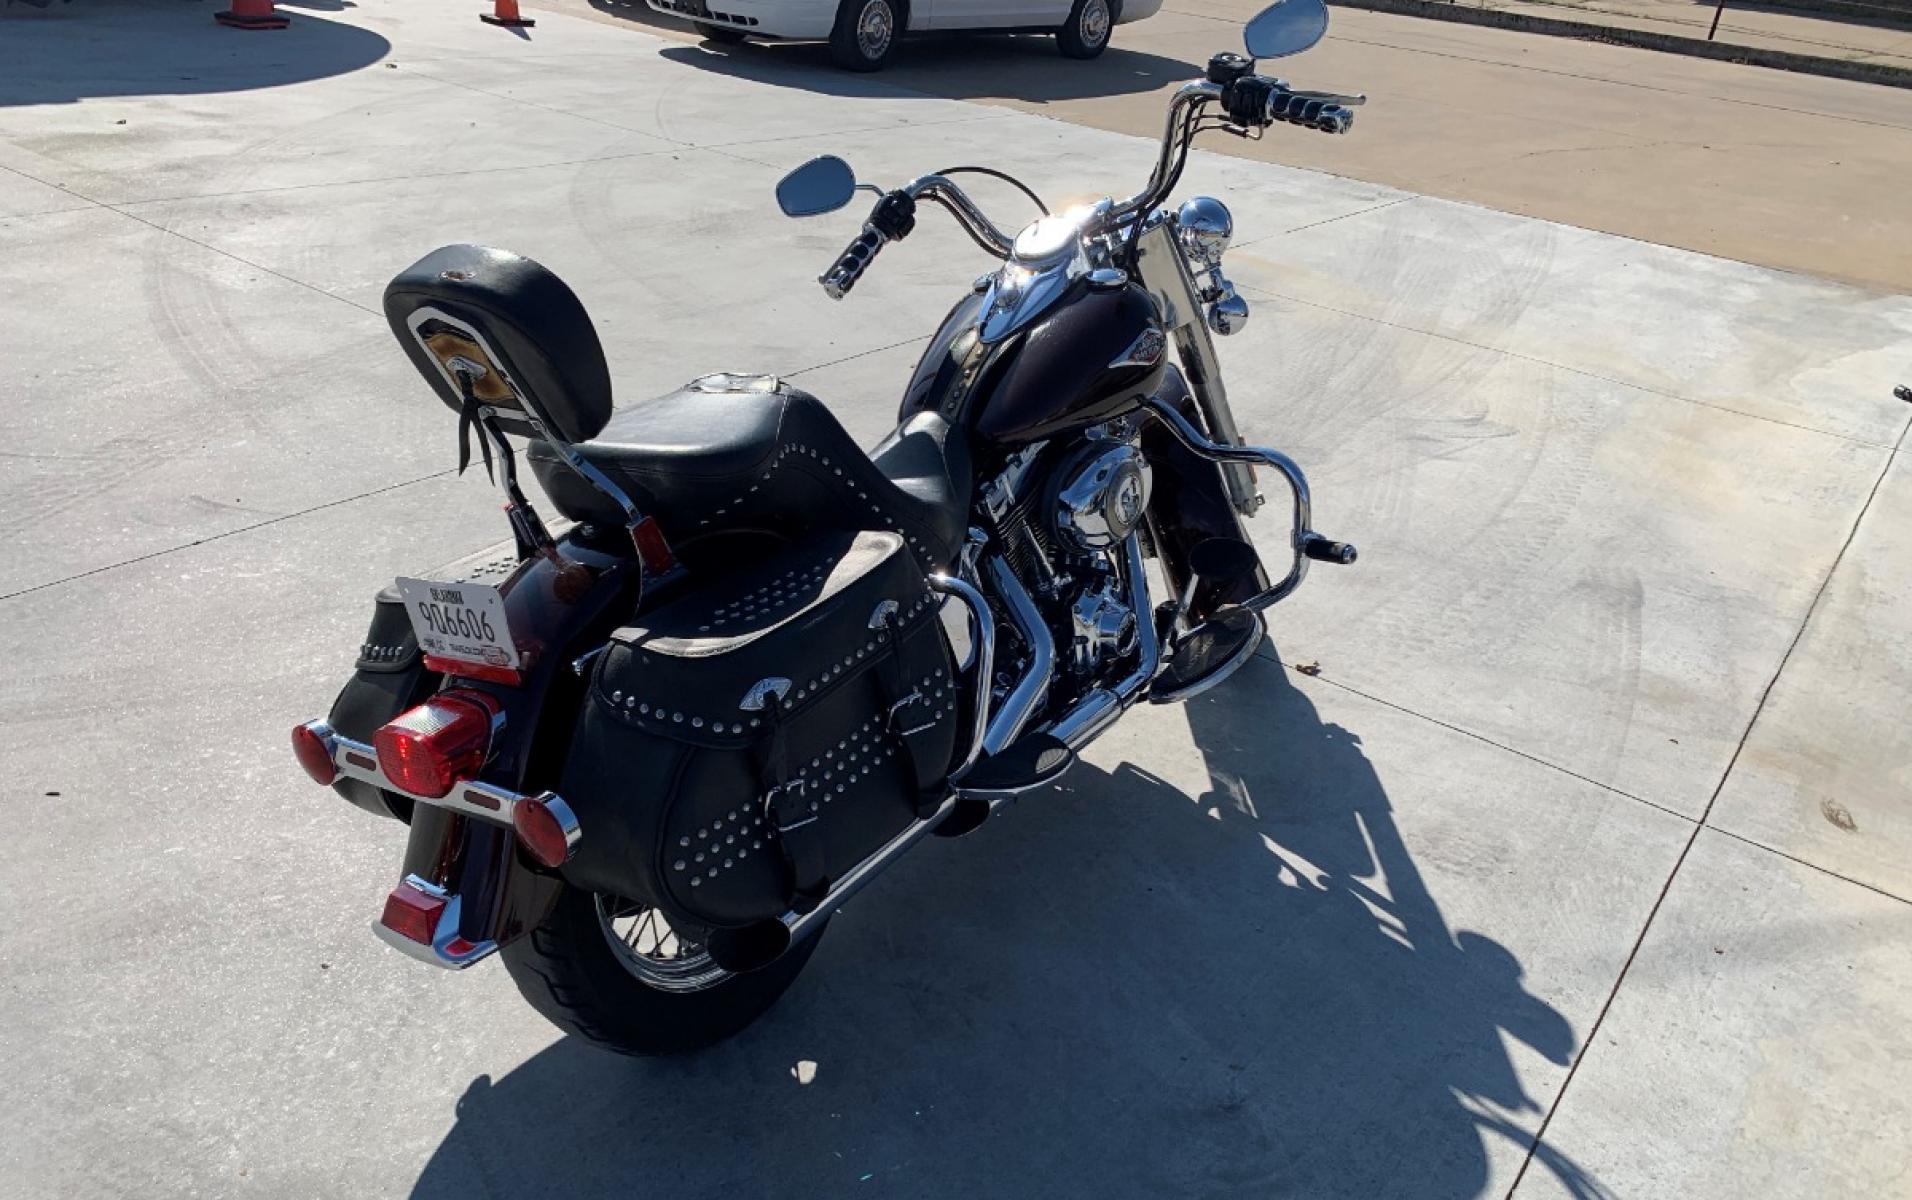 2009 PURPLE Harley-Davidson FLSTC - (1HD1BW5199Y) , located at 17760 HWY 62, MORRIS, 74445, 35.609104, -95.877060 - 2009 HARLEY- DAVIDSON FLSTC HERITAGE SOFTAIL 1584CC FEATURES CRUISE CONTROL, CHROME PASSING LAMPS, CHROME STAGGERED SHORTY EXHAUST WITH DUAL MUFFLERS, STUDDED LEATHER SADDLEBAGS, AND A FULL WINDSHIELD. A SMOOTH RIDE FOR LONG-RANGE TOURING COMFORT. IT RUNS GREAT !! ONLY 14,596 MILES. ** REBUILT TITLE - Photo #6